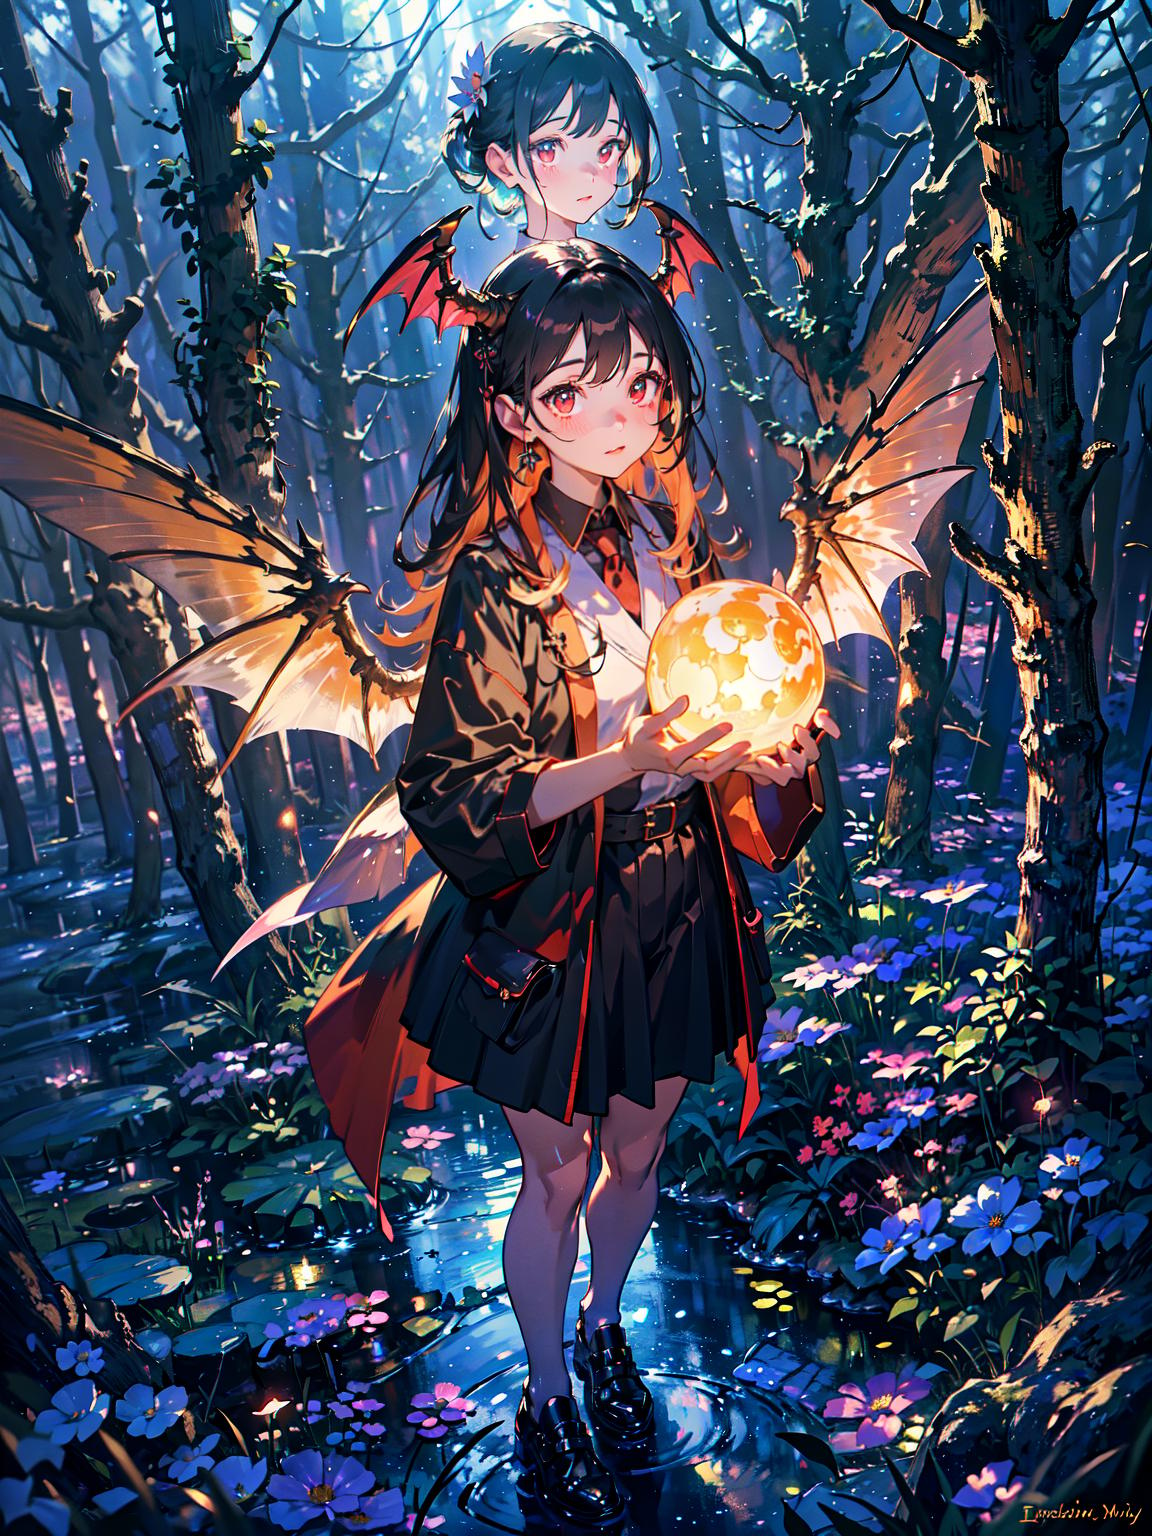  master piece, best quality, ultra detailed, highres, 4k.8k, Succubus character., Emcing the young , gazing at her with curiosity, standing gracefully, demonstrating her wings., Intrigued expression., BREAK A succubus encountering a young ., Enchanted forest clearing., Flowers, erflies, and a mystical glowing orb., BREAK Mysterious and enchanting atmosphere., Soft glowing light, sparkles, and a dreamlike ambiance.,